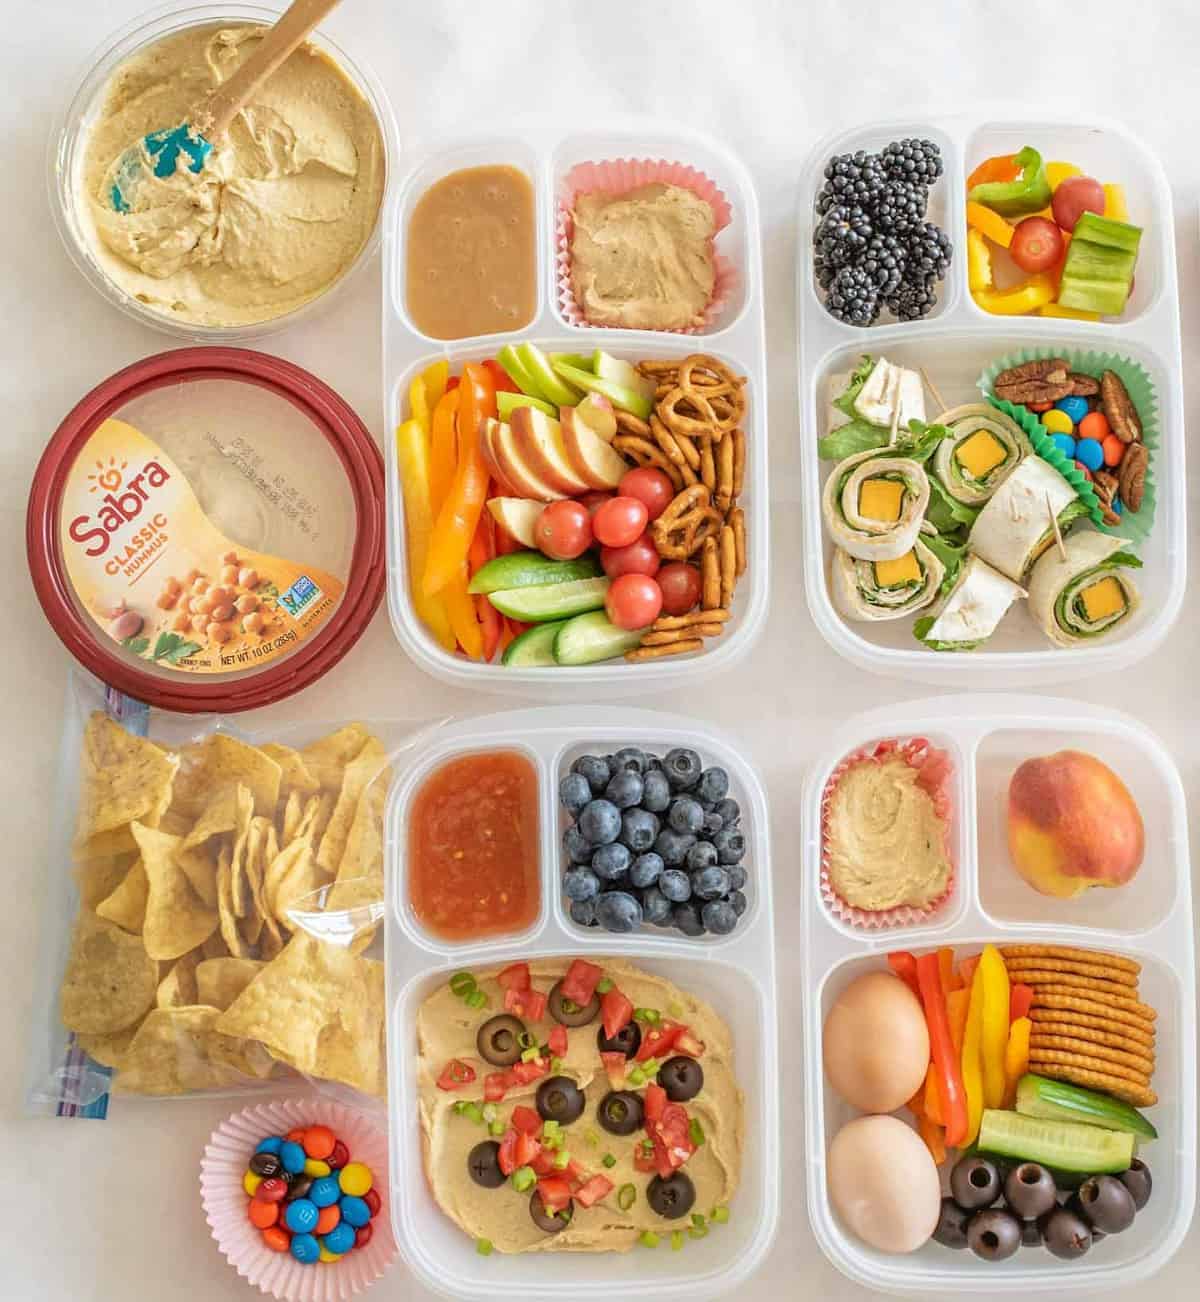 https://www.blessthismessplease.com/wp-content/uploads/2018/09/lunch-ideas-for-school-or-work-sabra-hummus-8-of-8.jpg